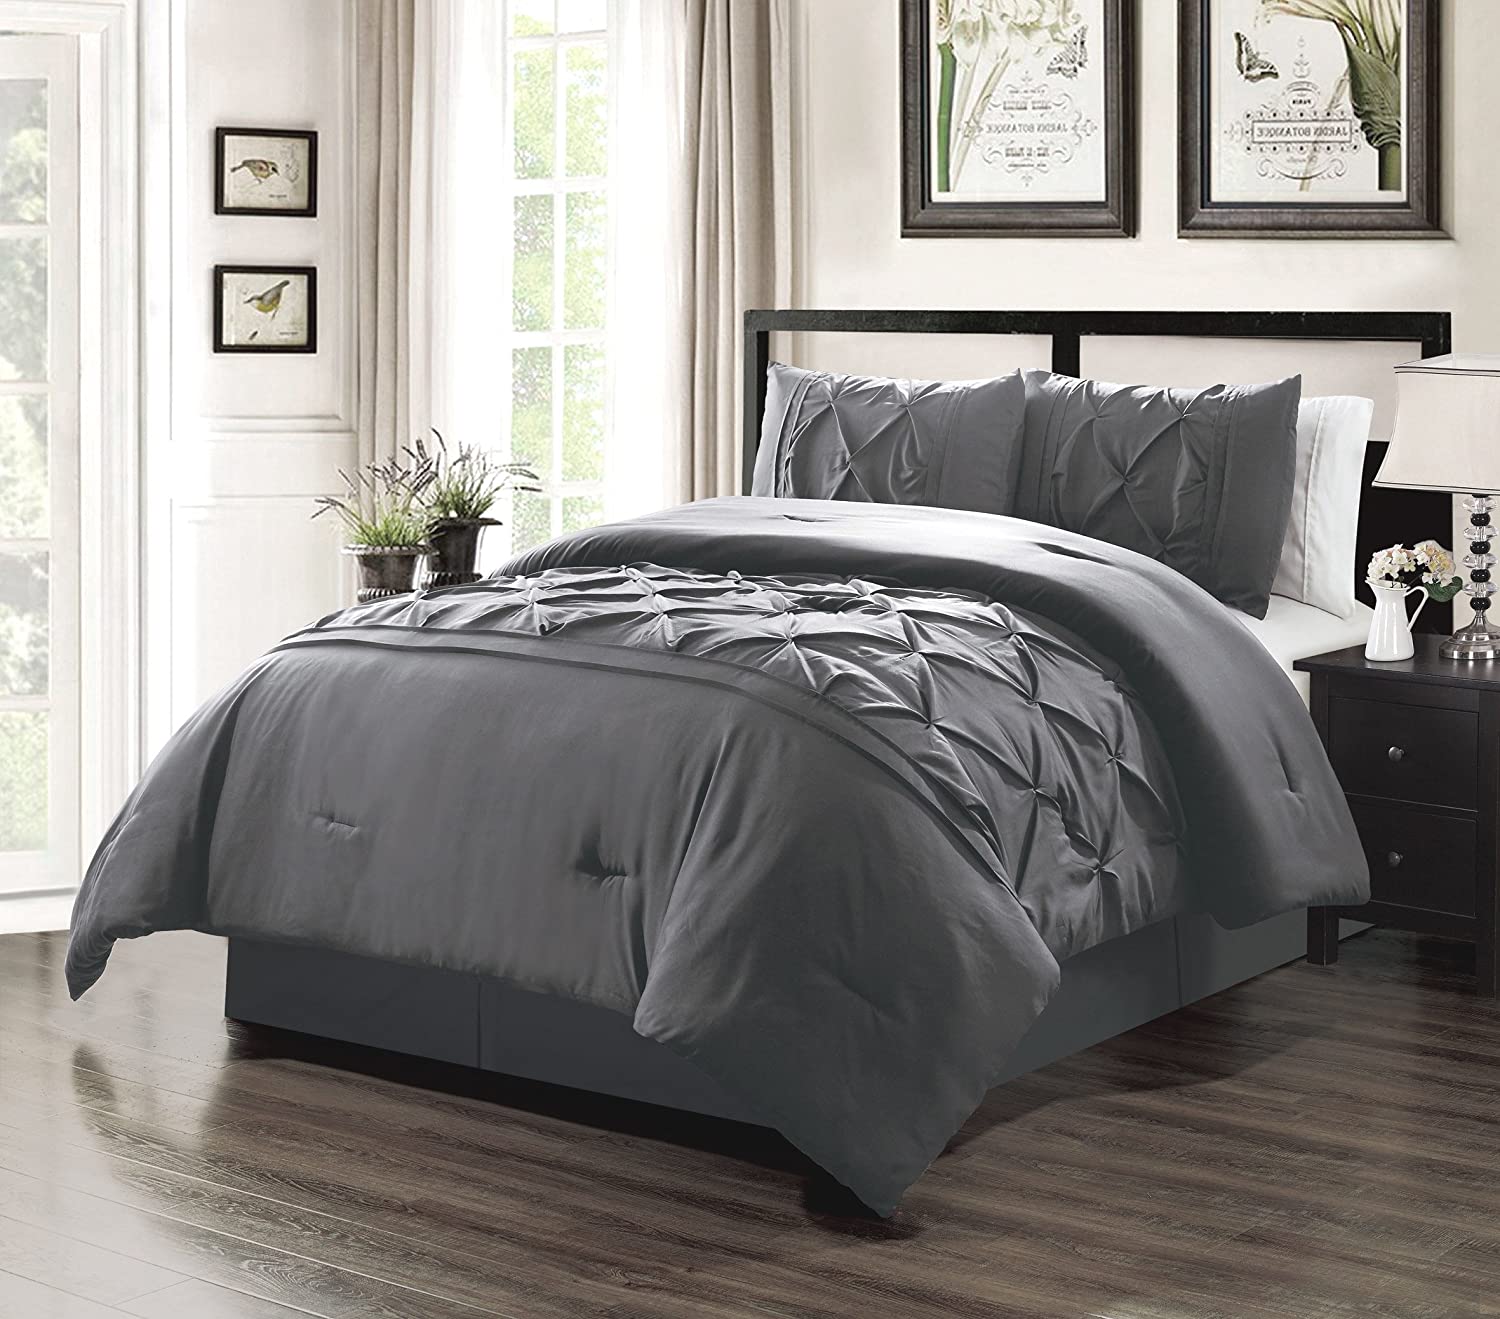 Details about   Grand Linen 3 Piece King Size Black/Grey/Gray Double-Needle Stitch Puckered Pinc 